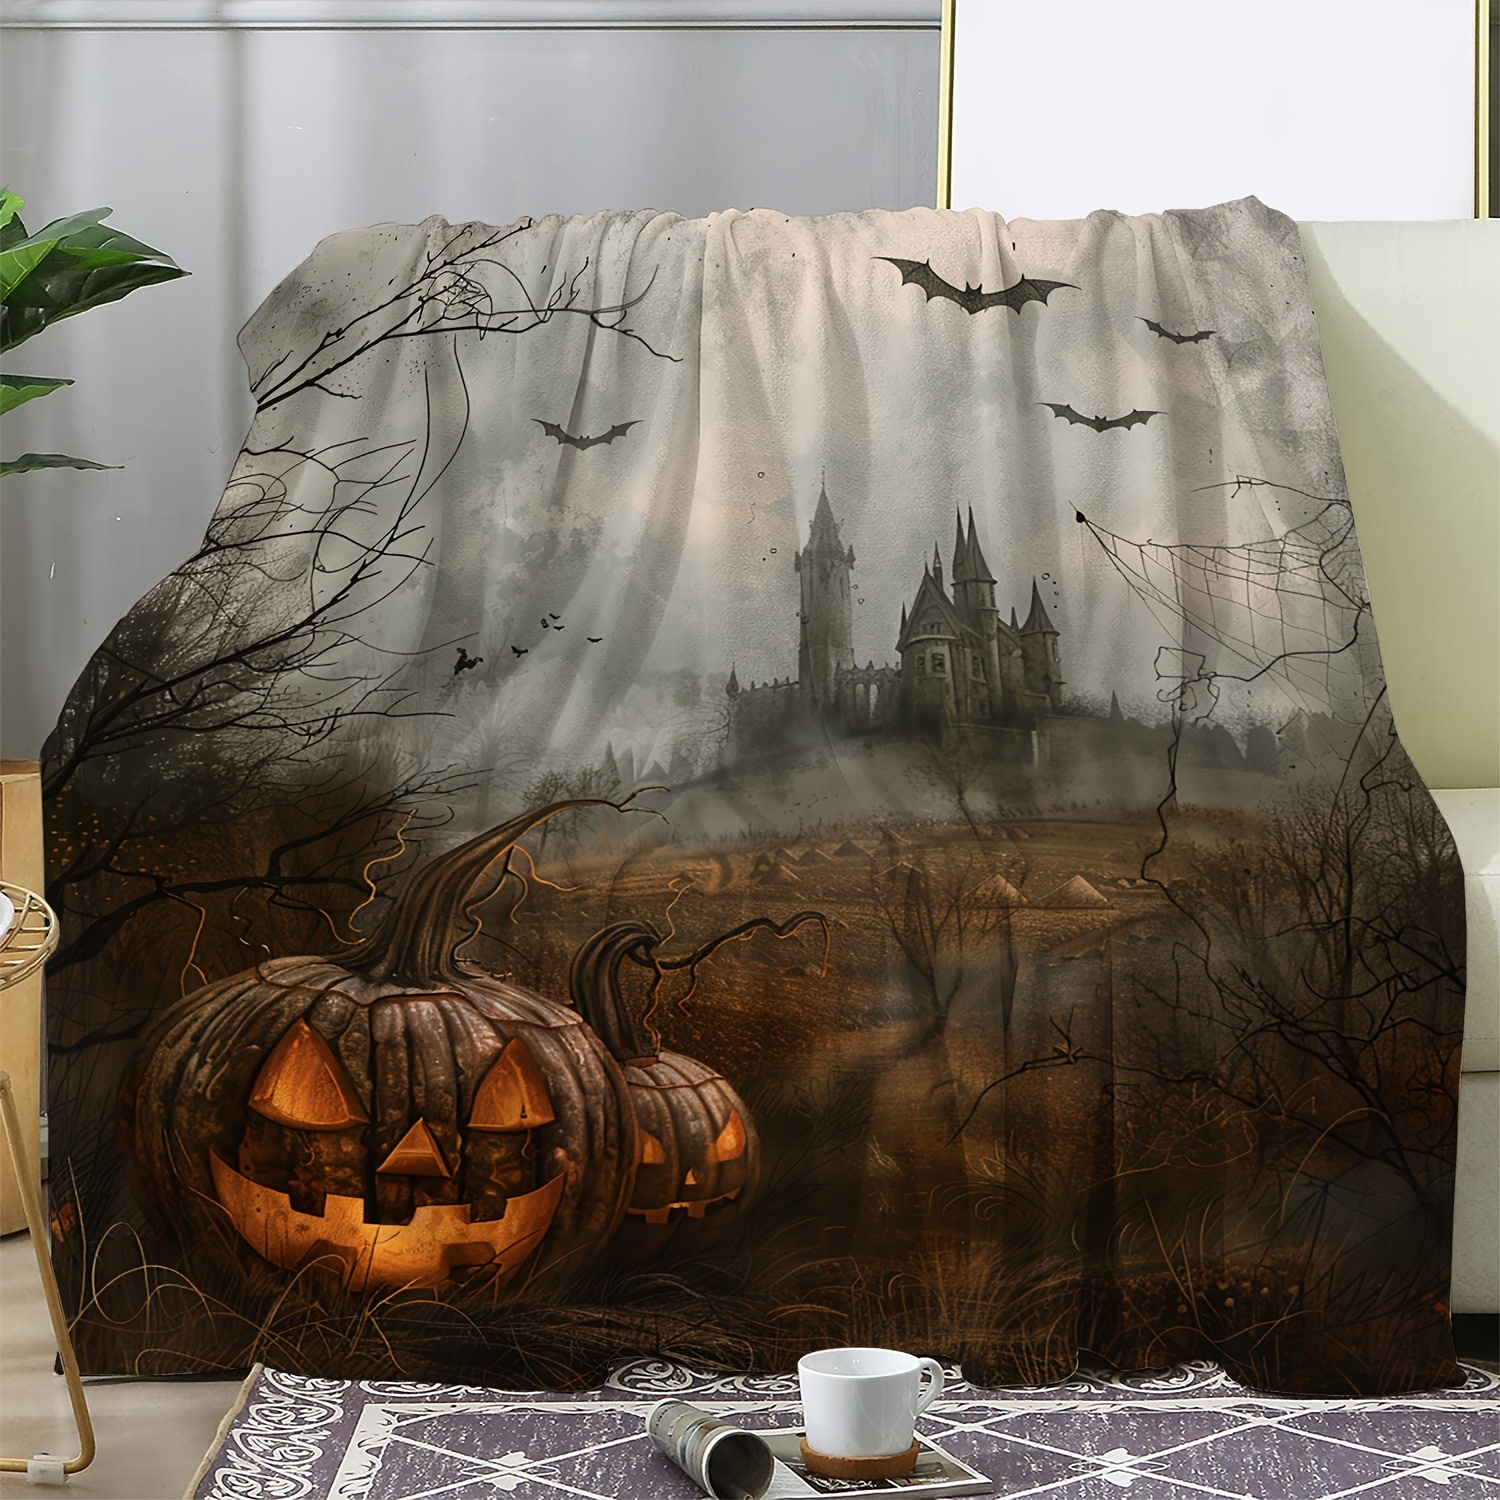 

Vintage Halloween Pumpkin Castle & Bat Print Flannel Blanket - Cozy, Soft, All-season Throw For Couch, Bed, Car, Office, Camping & Travel - Perfect Gift Idea